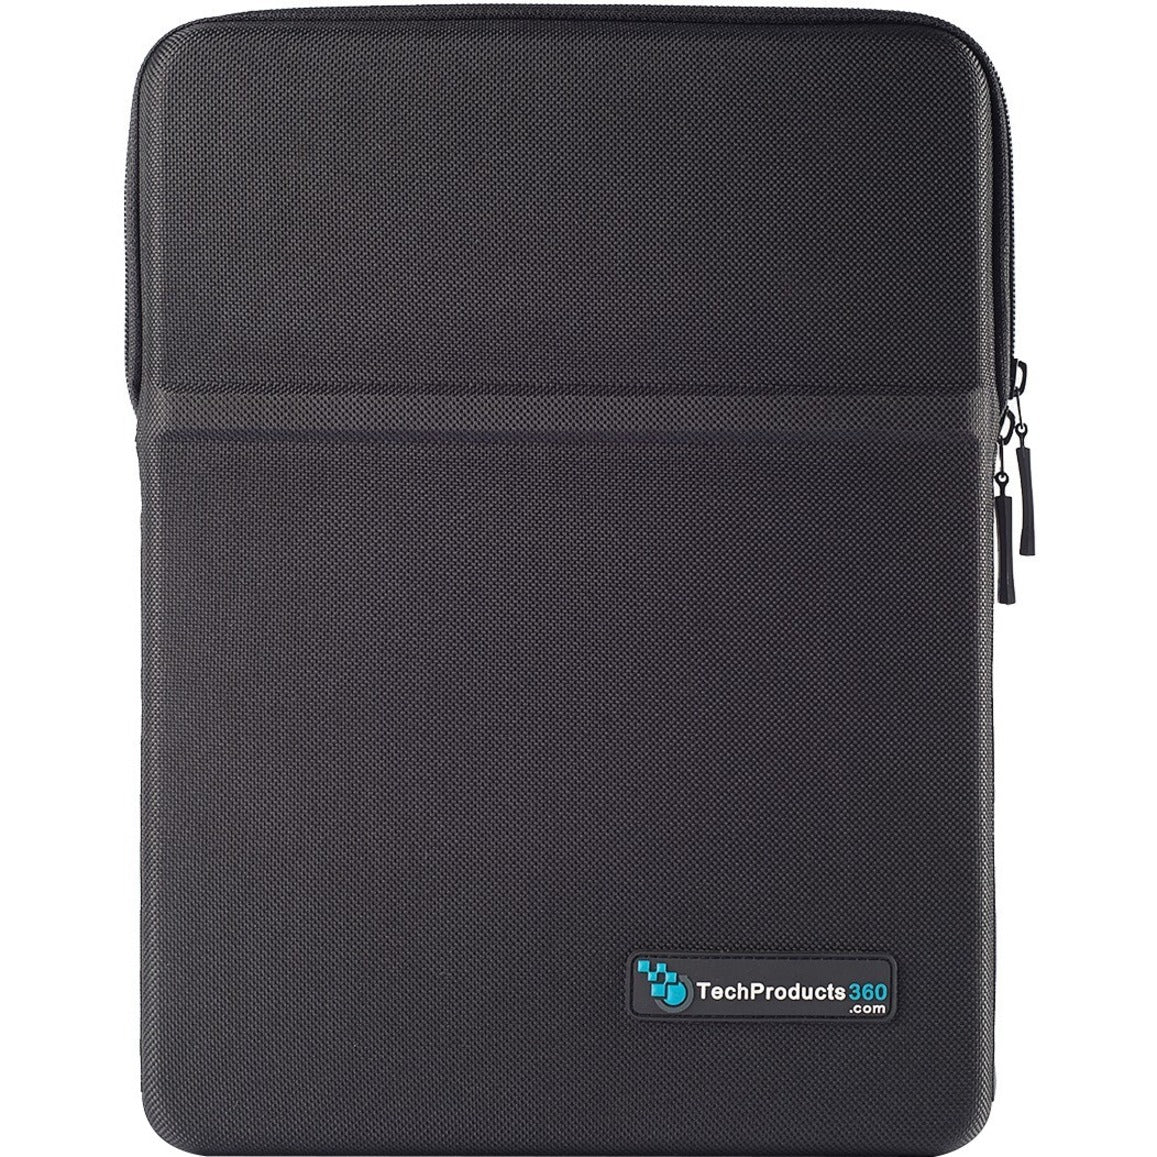 TechProducts360 Carrying Case (Sleeve) for 13" Notebook - Black